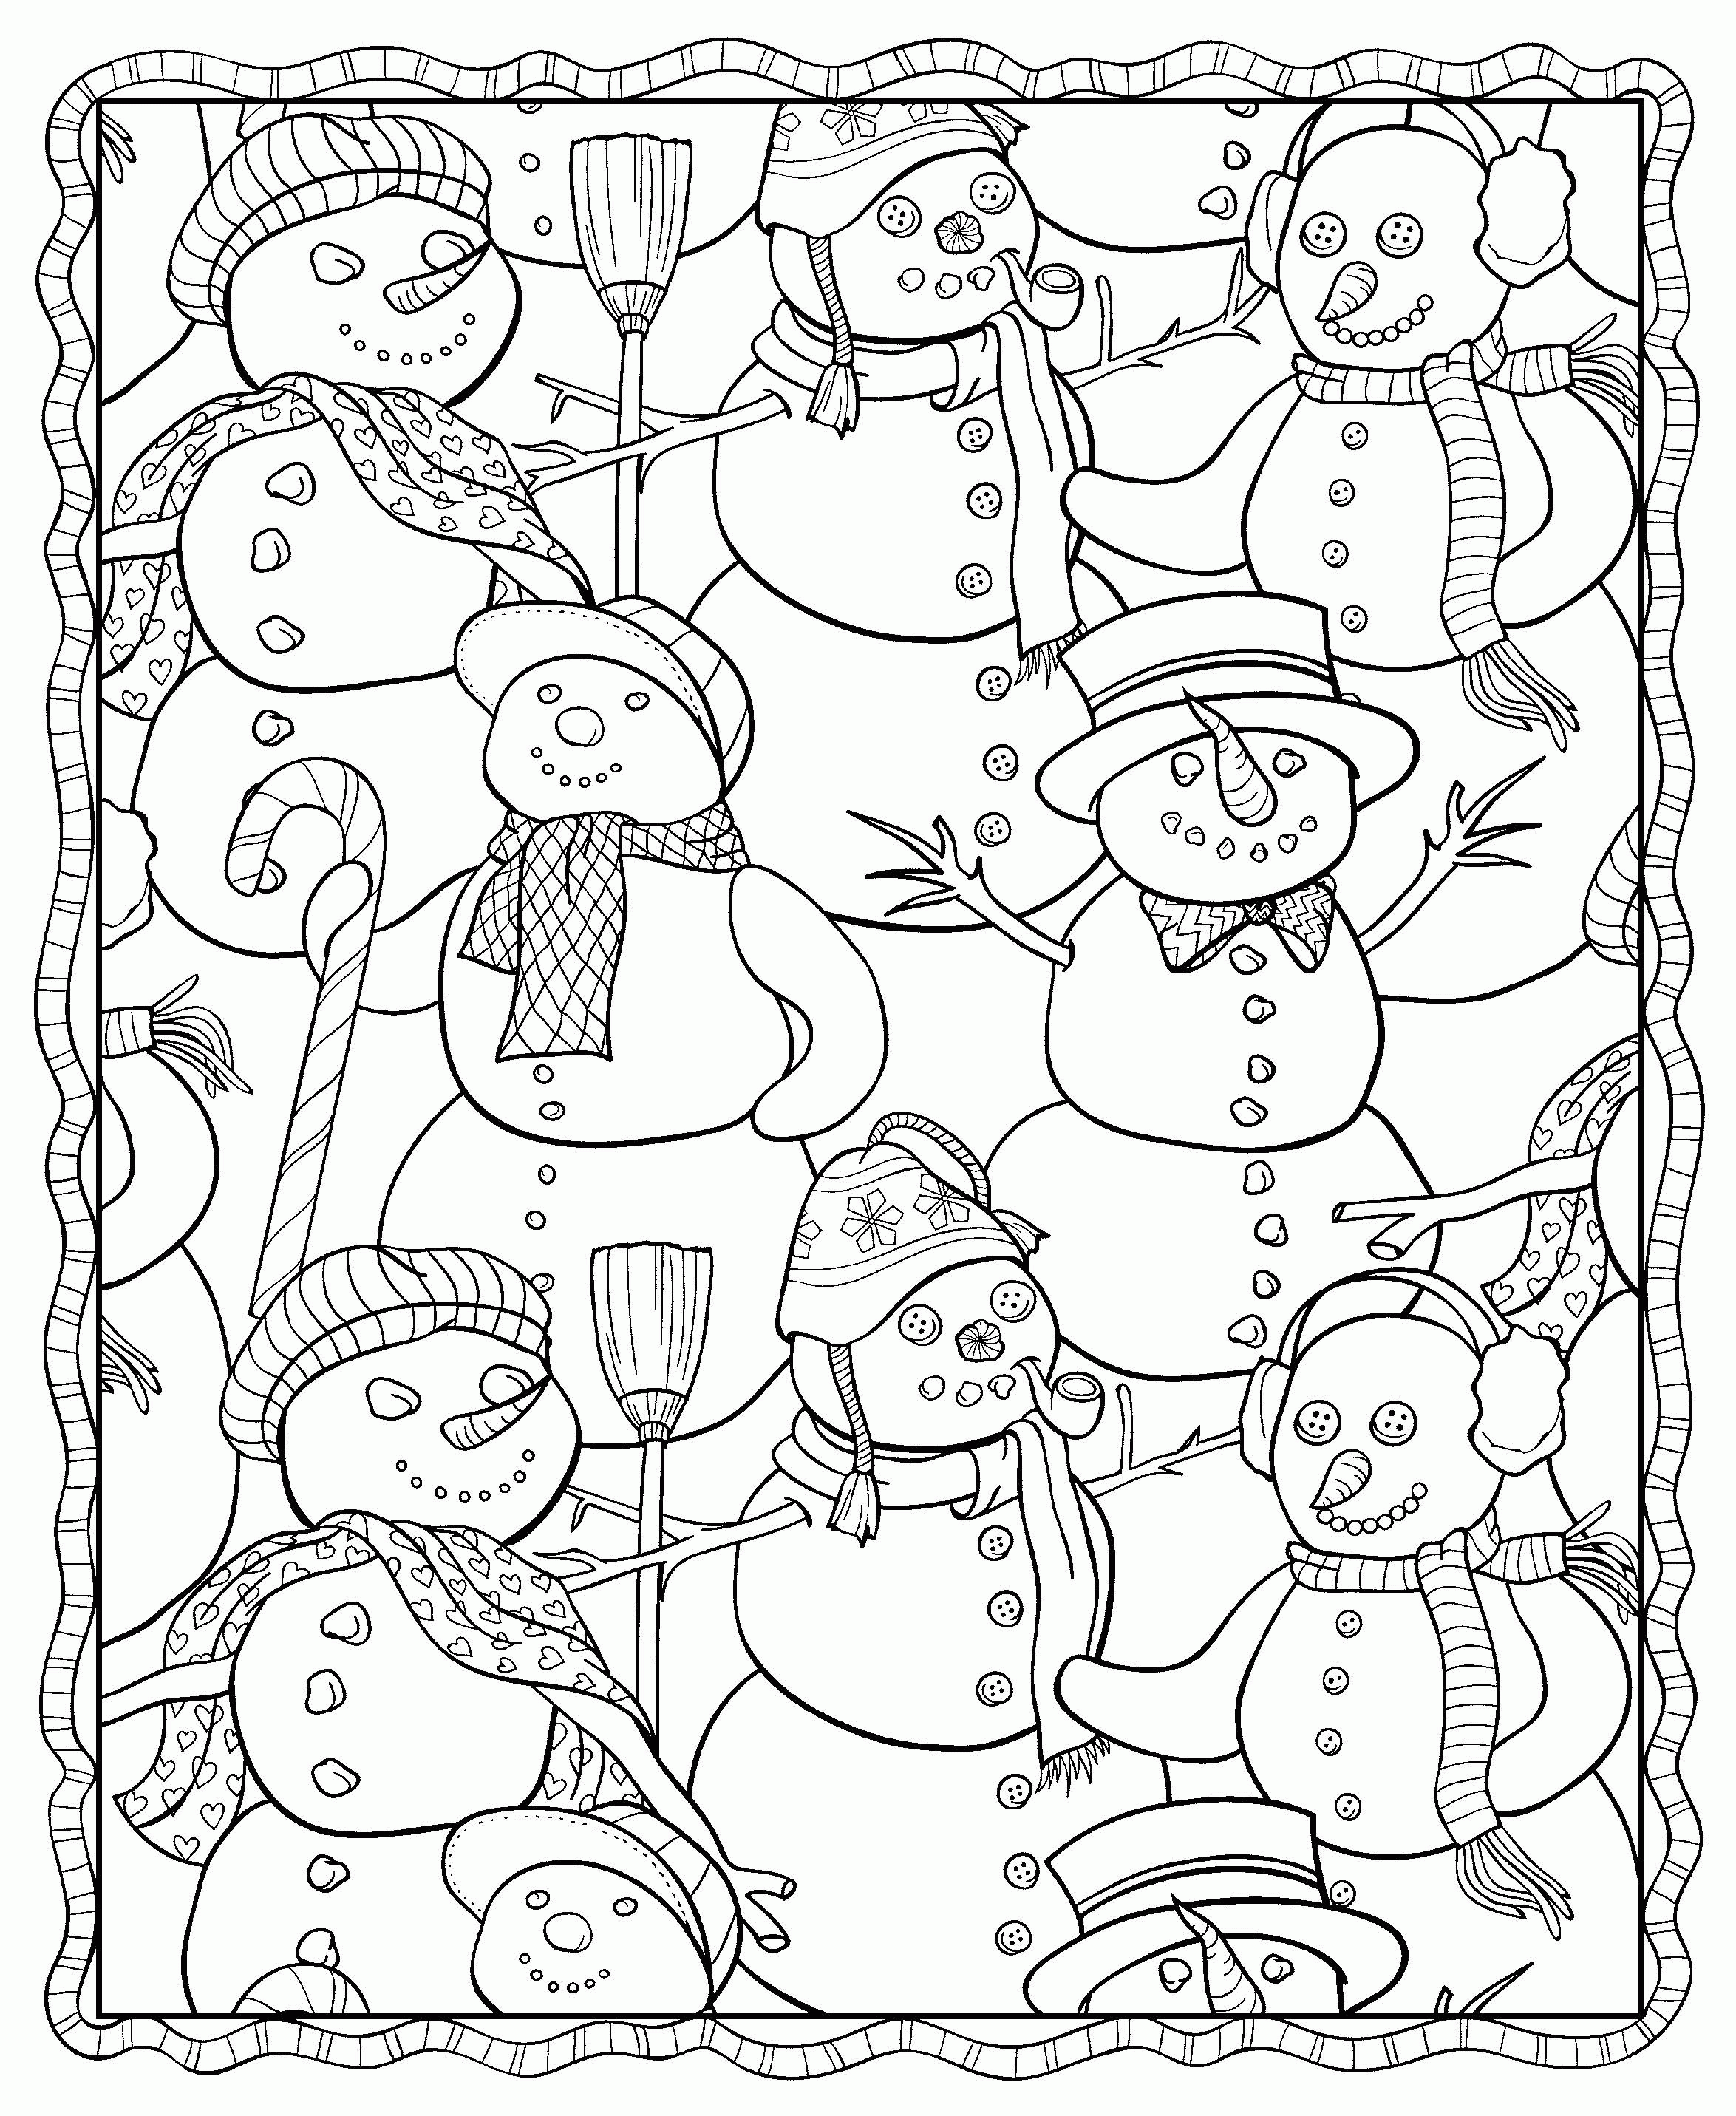 Coloring Pages for Adults | Faber-Castell